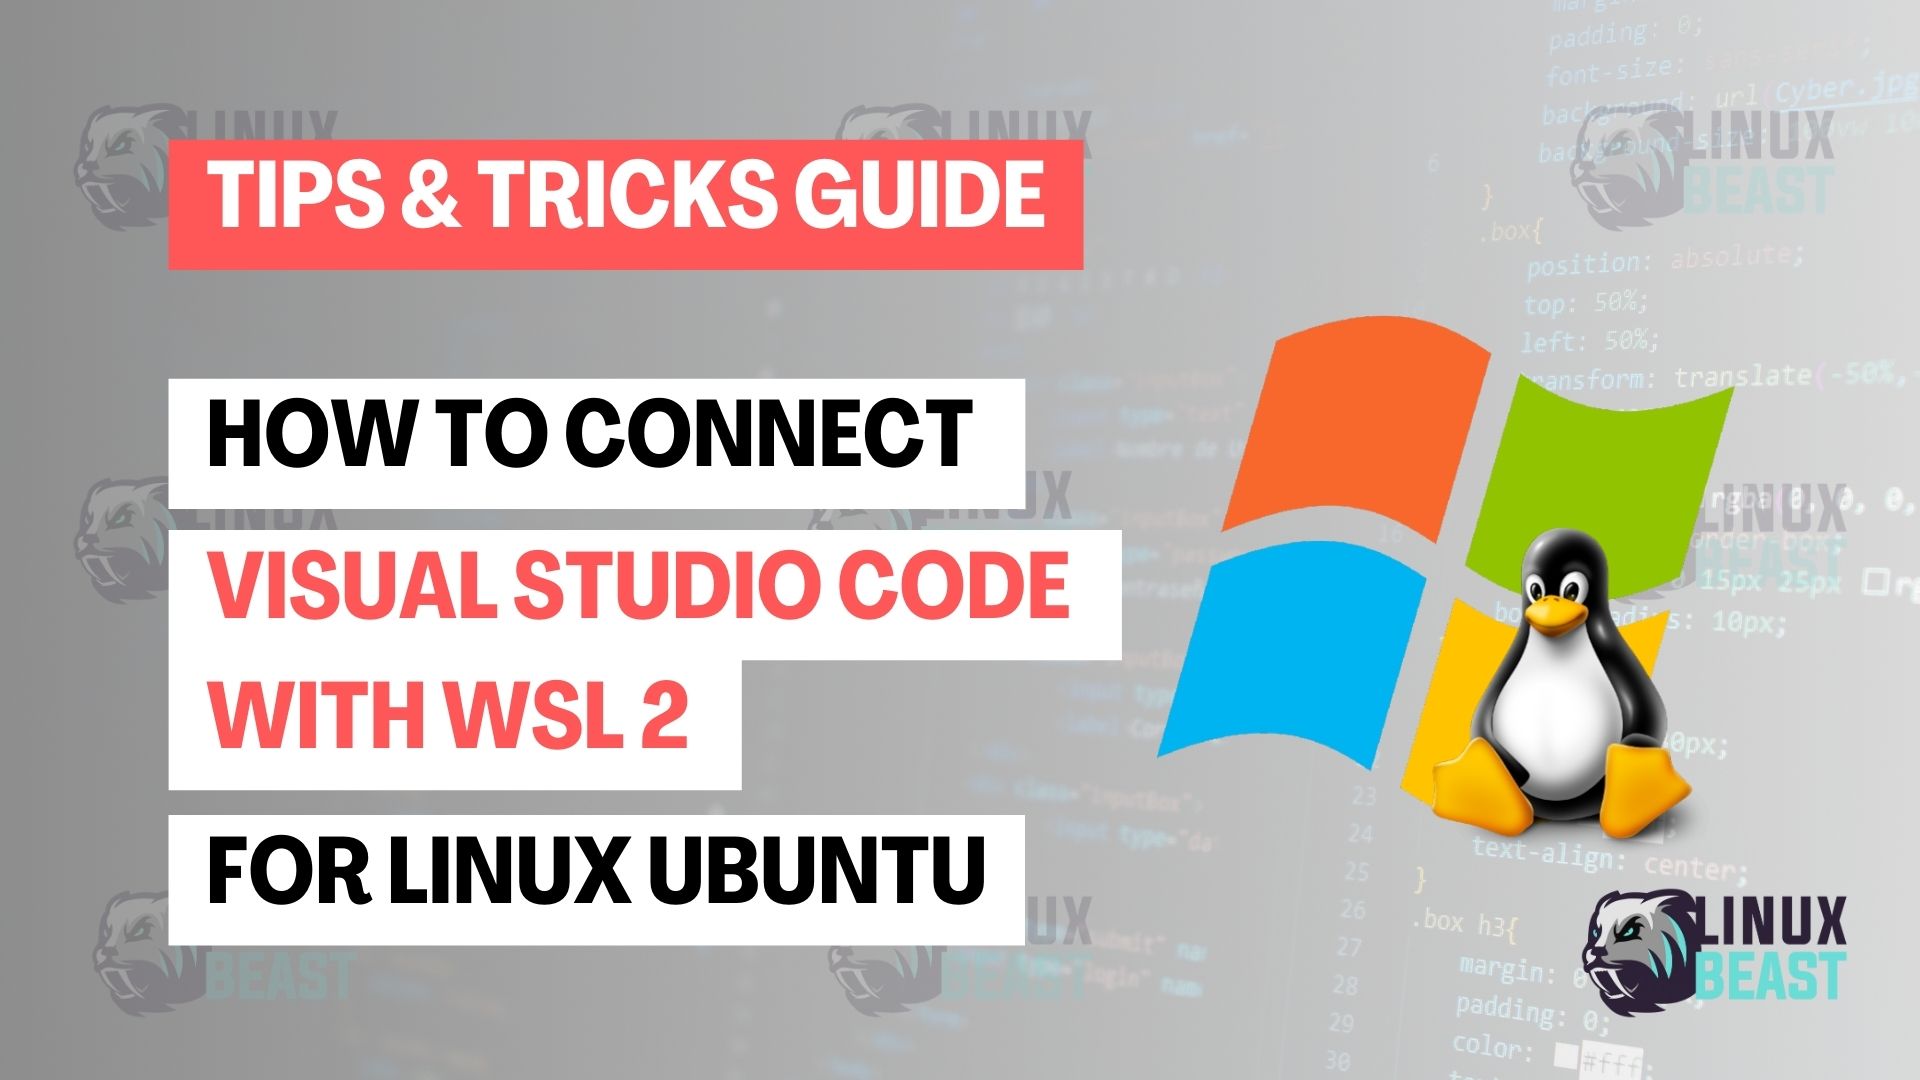 How to Connect Visual Studio Code with WSL 2 for Linux Ubuntu